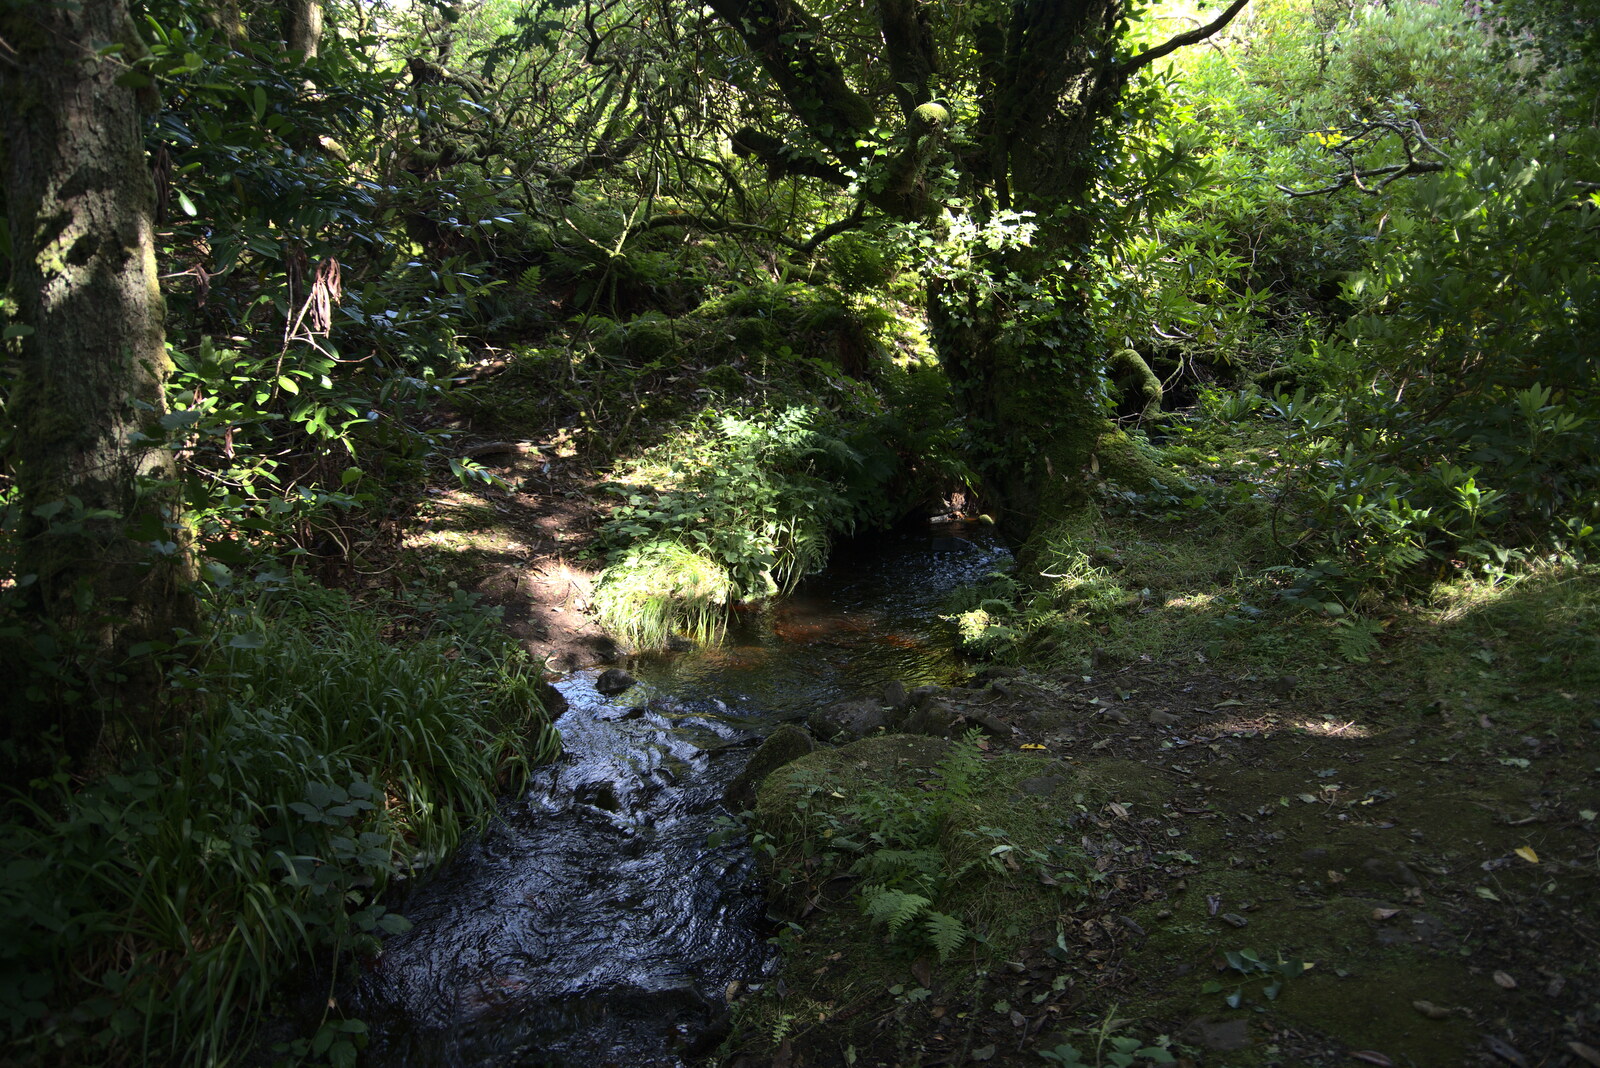 A stream in the woods from Walks Around Benbulben and Carrowmore, County Sligo, Ireland - 13th August 2021